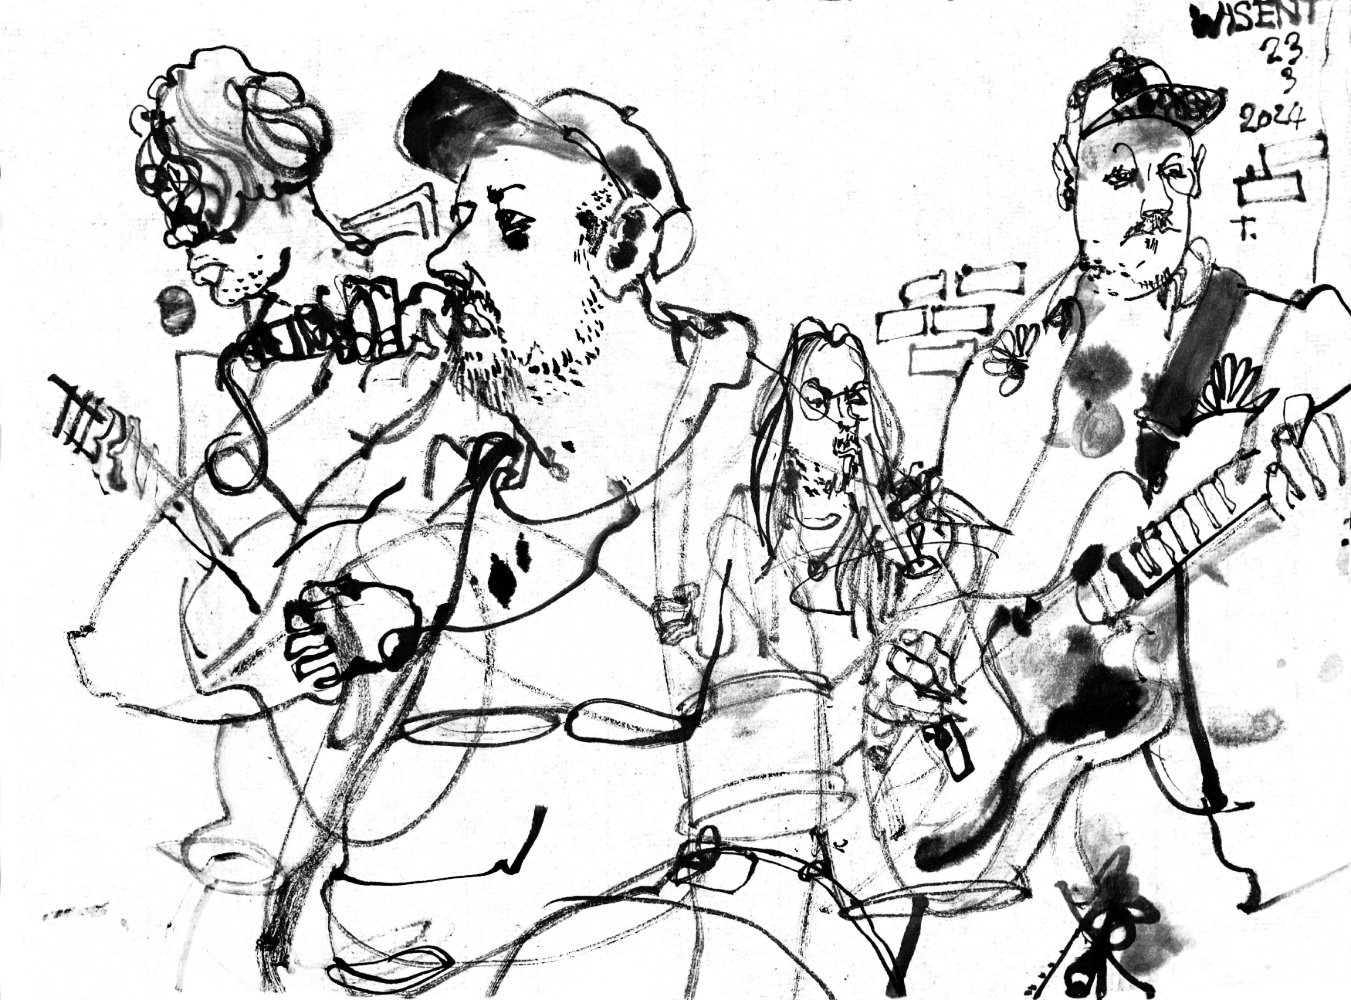 Ink drawing of four male musicians - guitar, voice, drums, e-bass